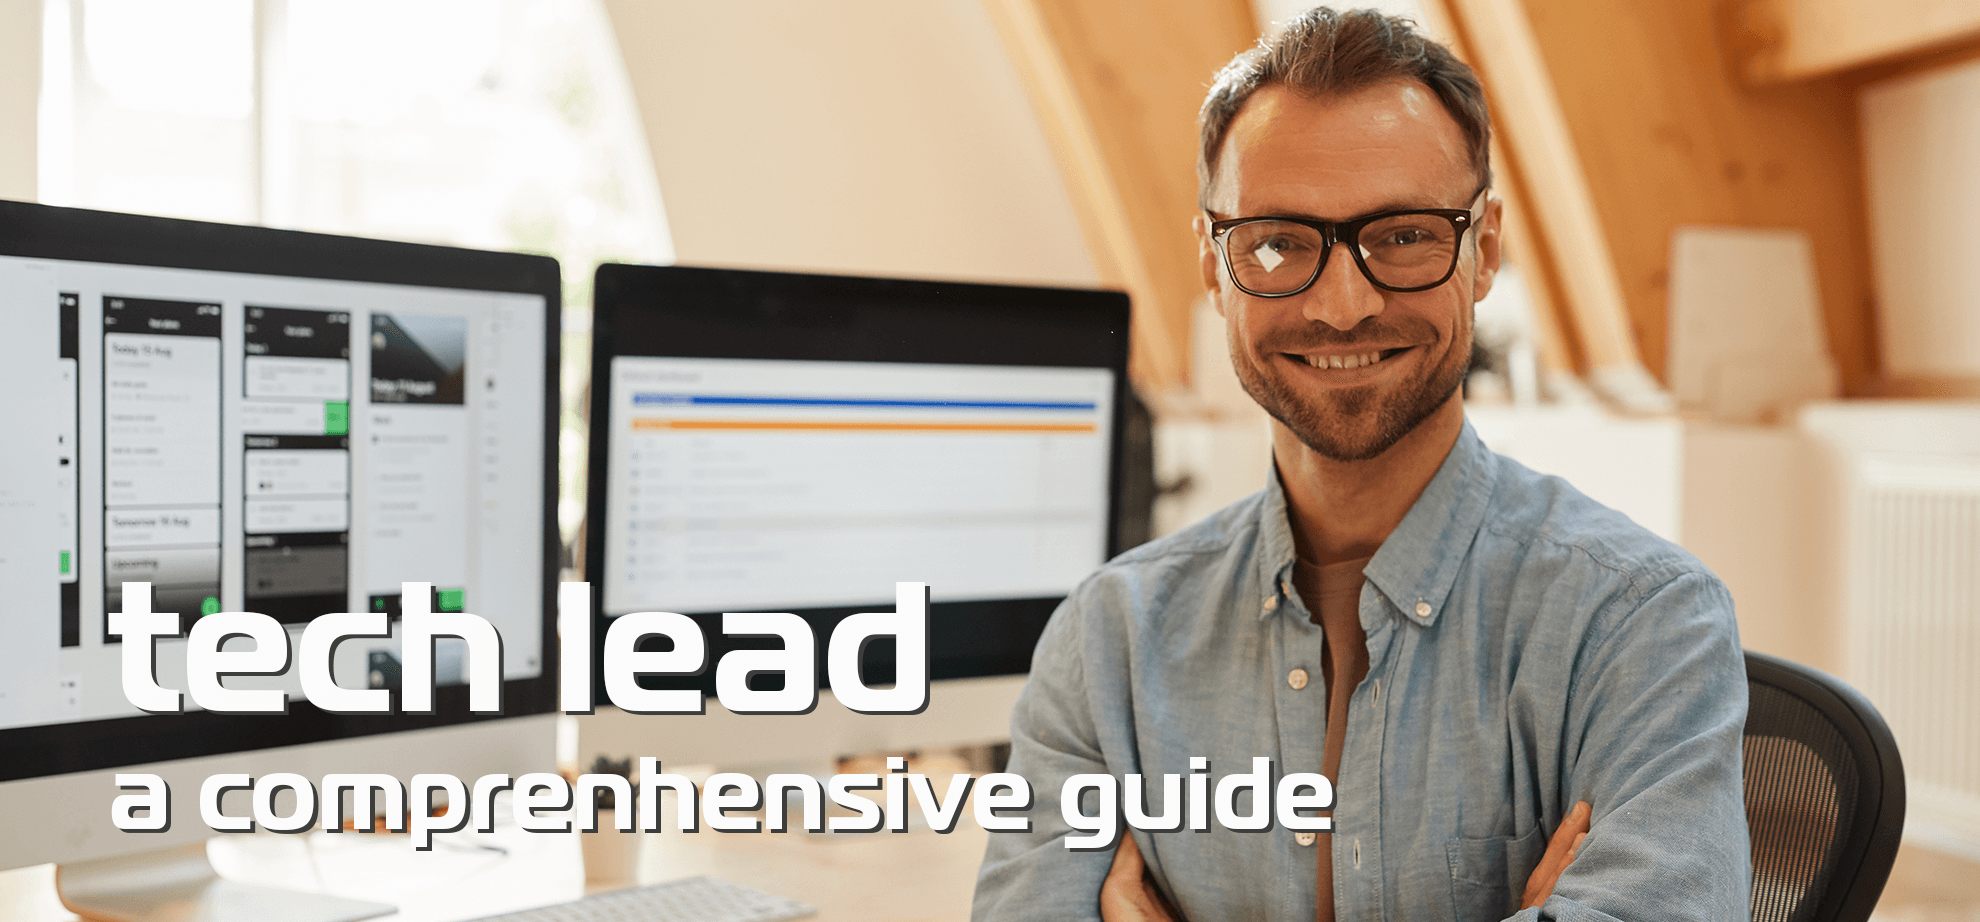 Technical Lead: A comprehensive guide